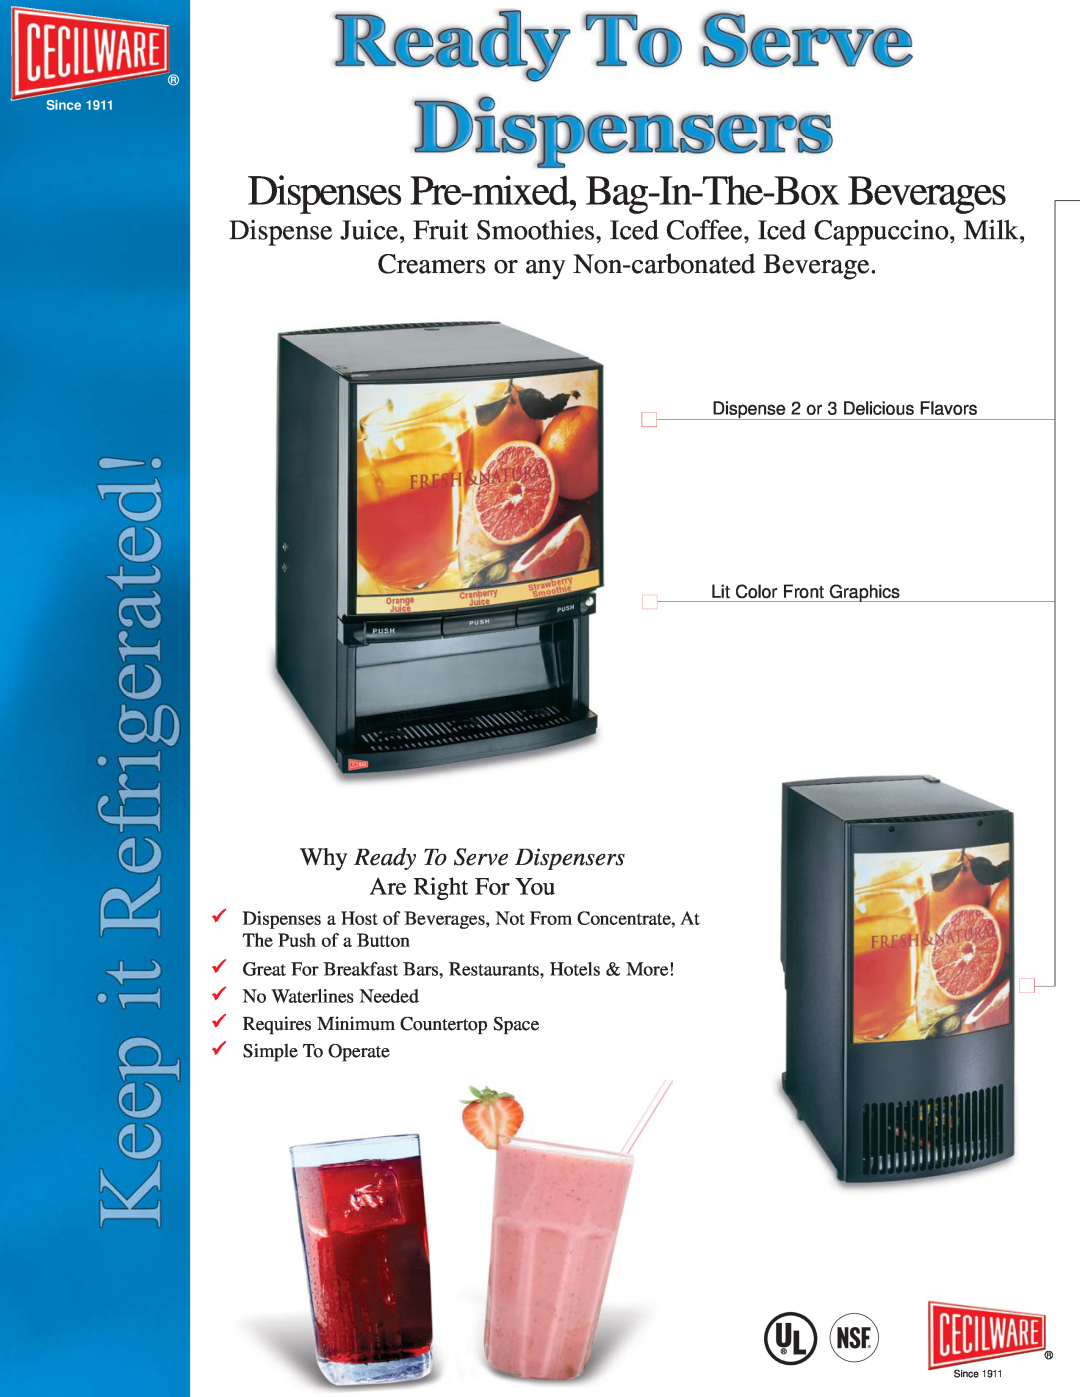 Cecilware manual Dispenses Pre-mixed, Bag-In-The-Box Beverages, Why Ready To Serve Dispensers, Are Right For You 